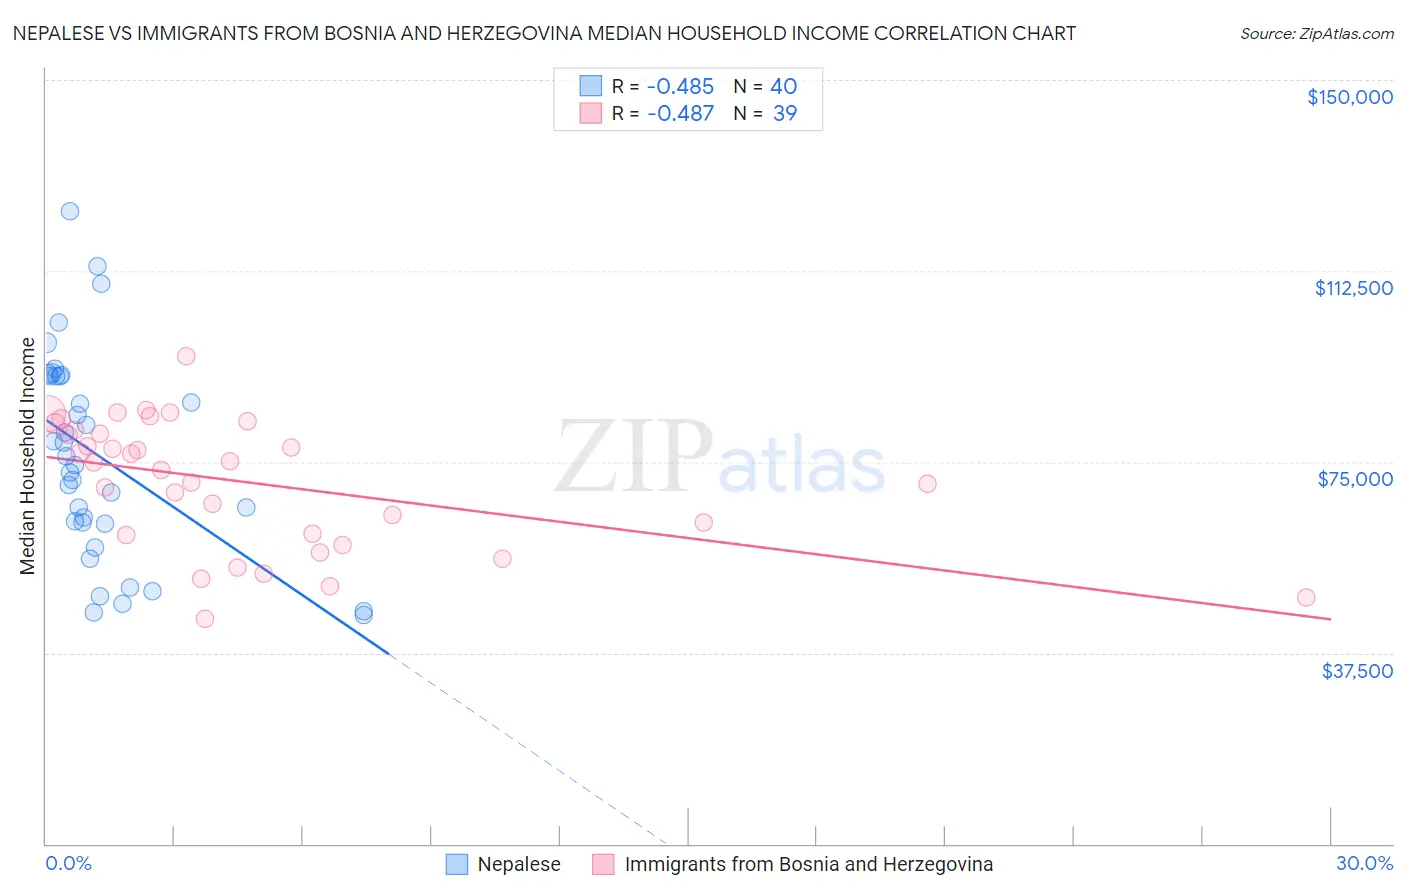 Nepalese vs Immigrants from Bosnia and Herzegovina Median Household Income